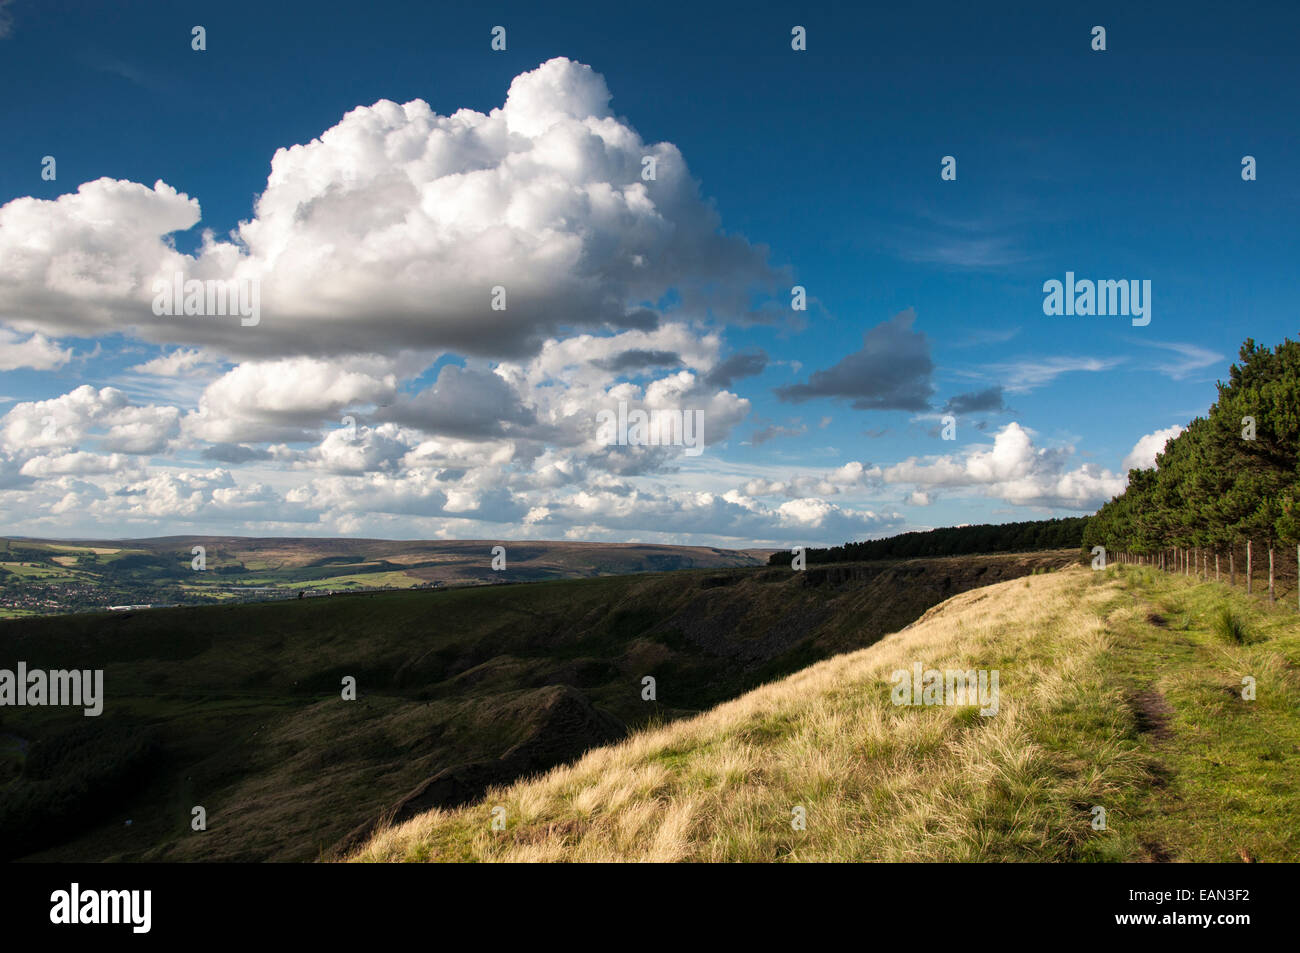 Coombes edge in Charlesworth near Glossop in Derbyshire. A Summer landscape with fluffy clouds in a blue sky. Stock Photo